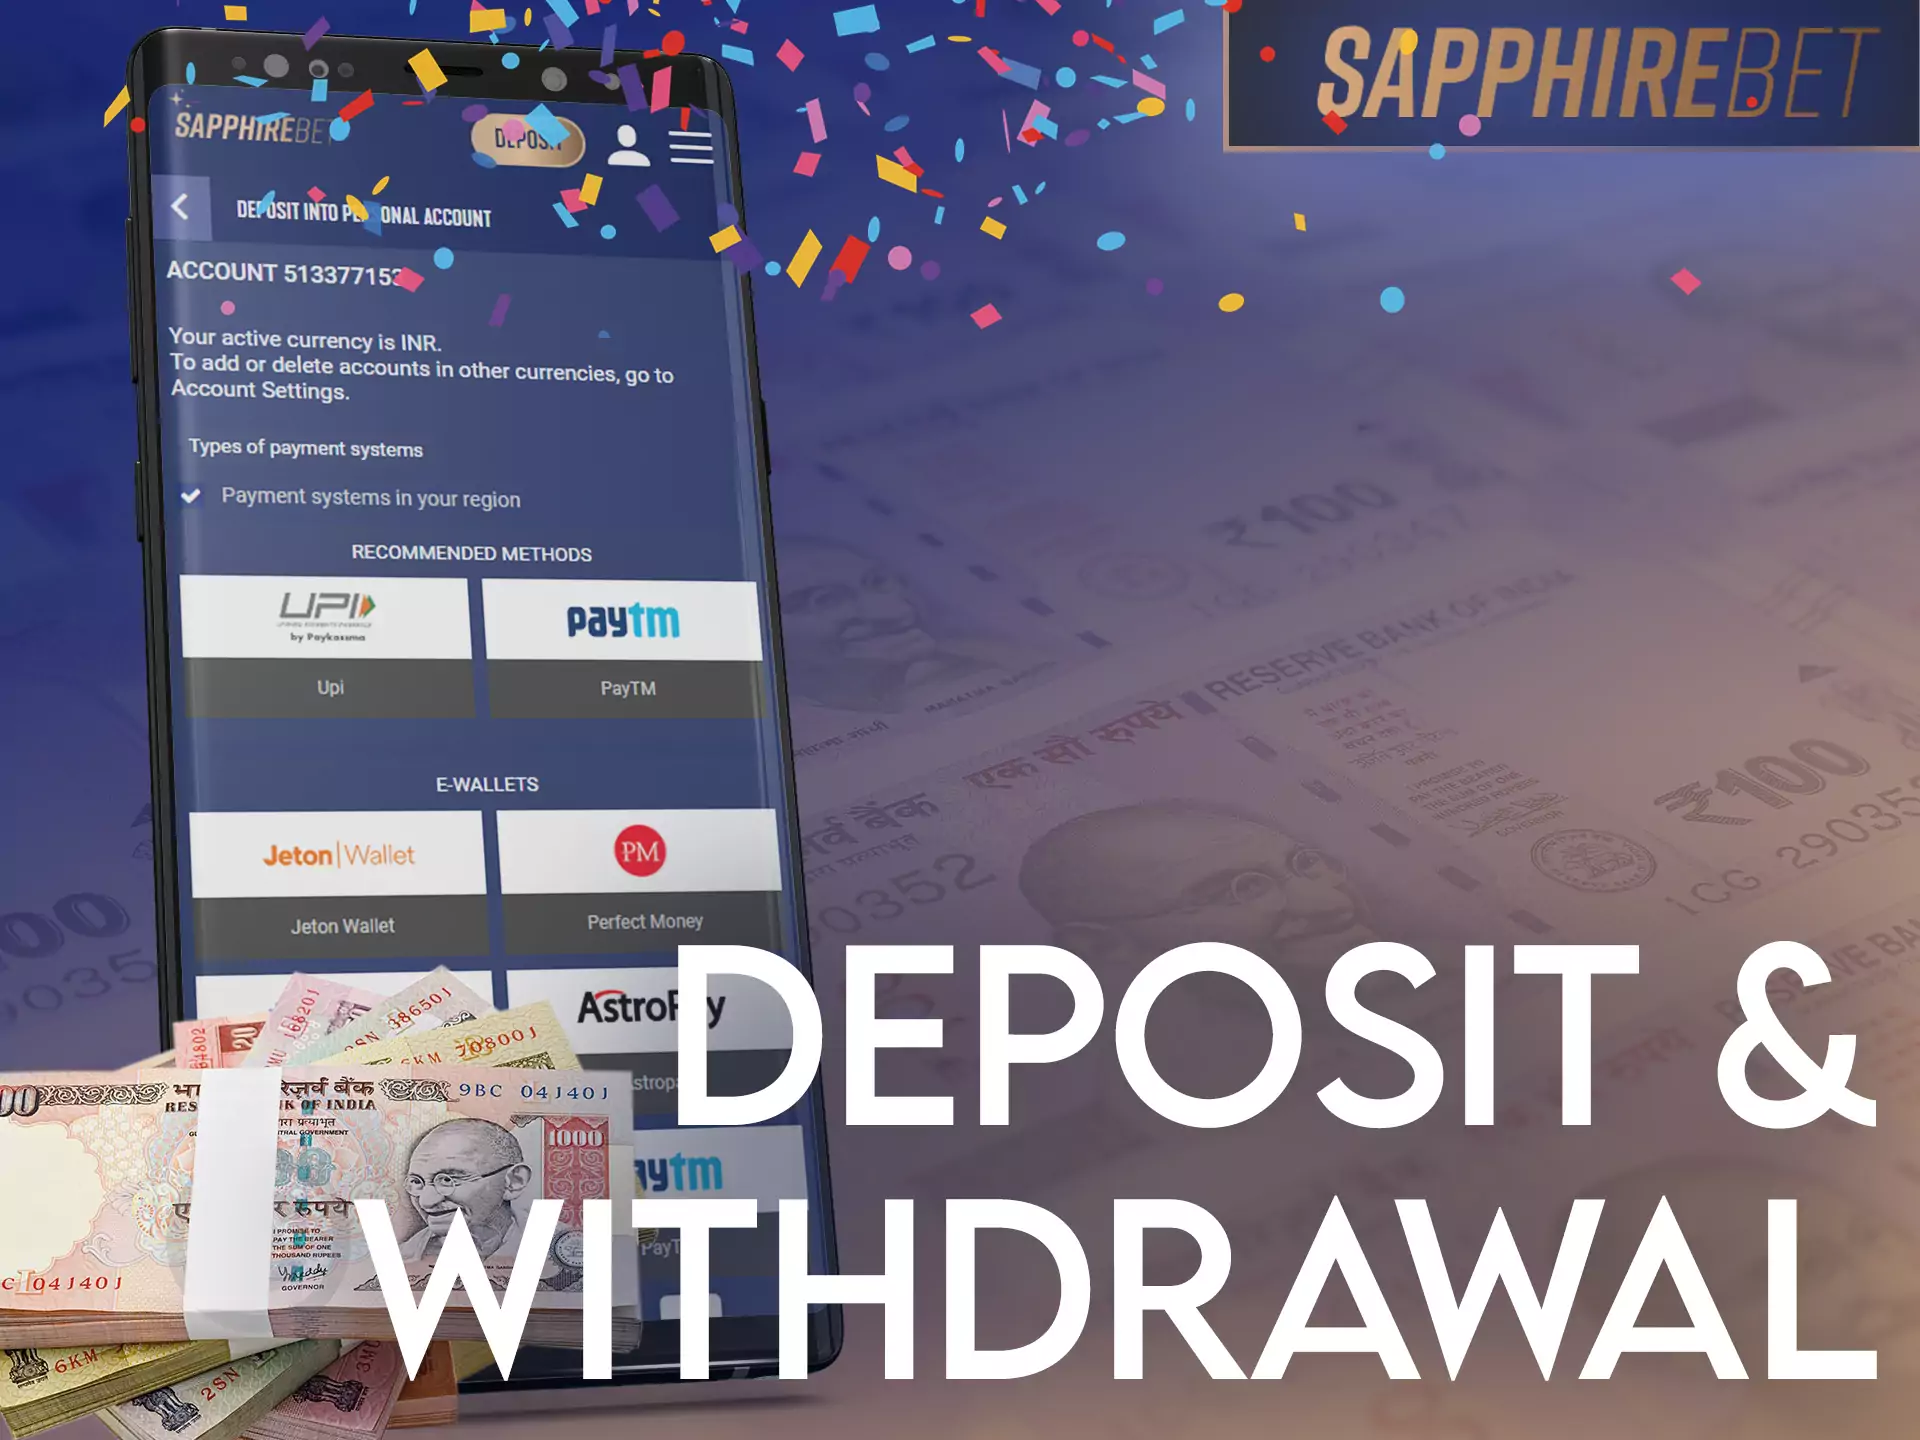 It is very easy to top up your account and withdraw winnings on Sapphirebet, try it.